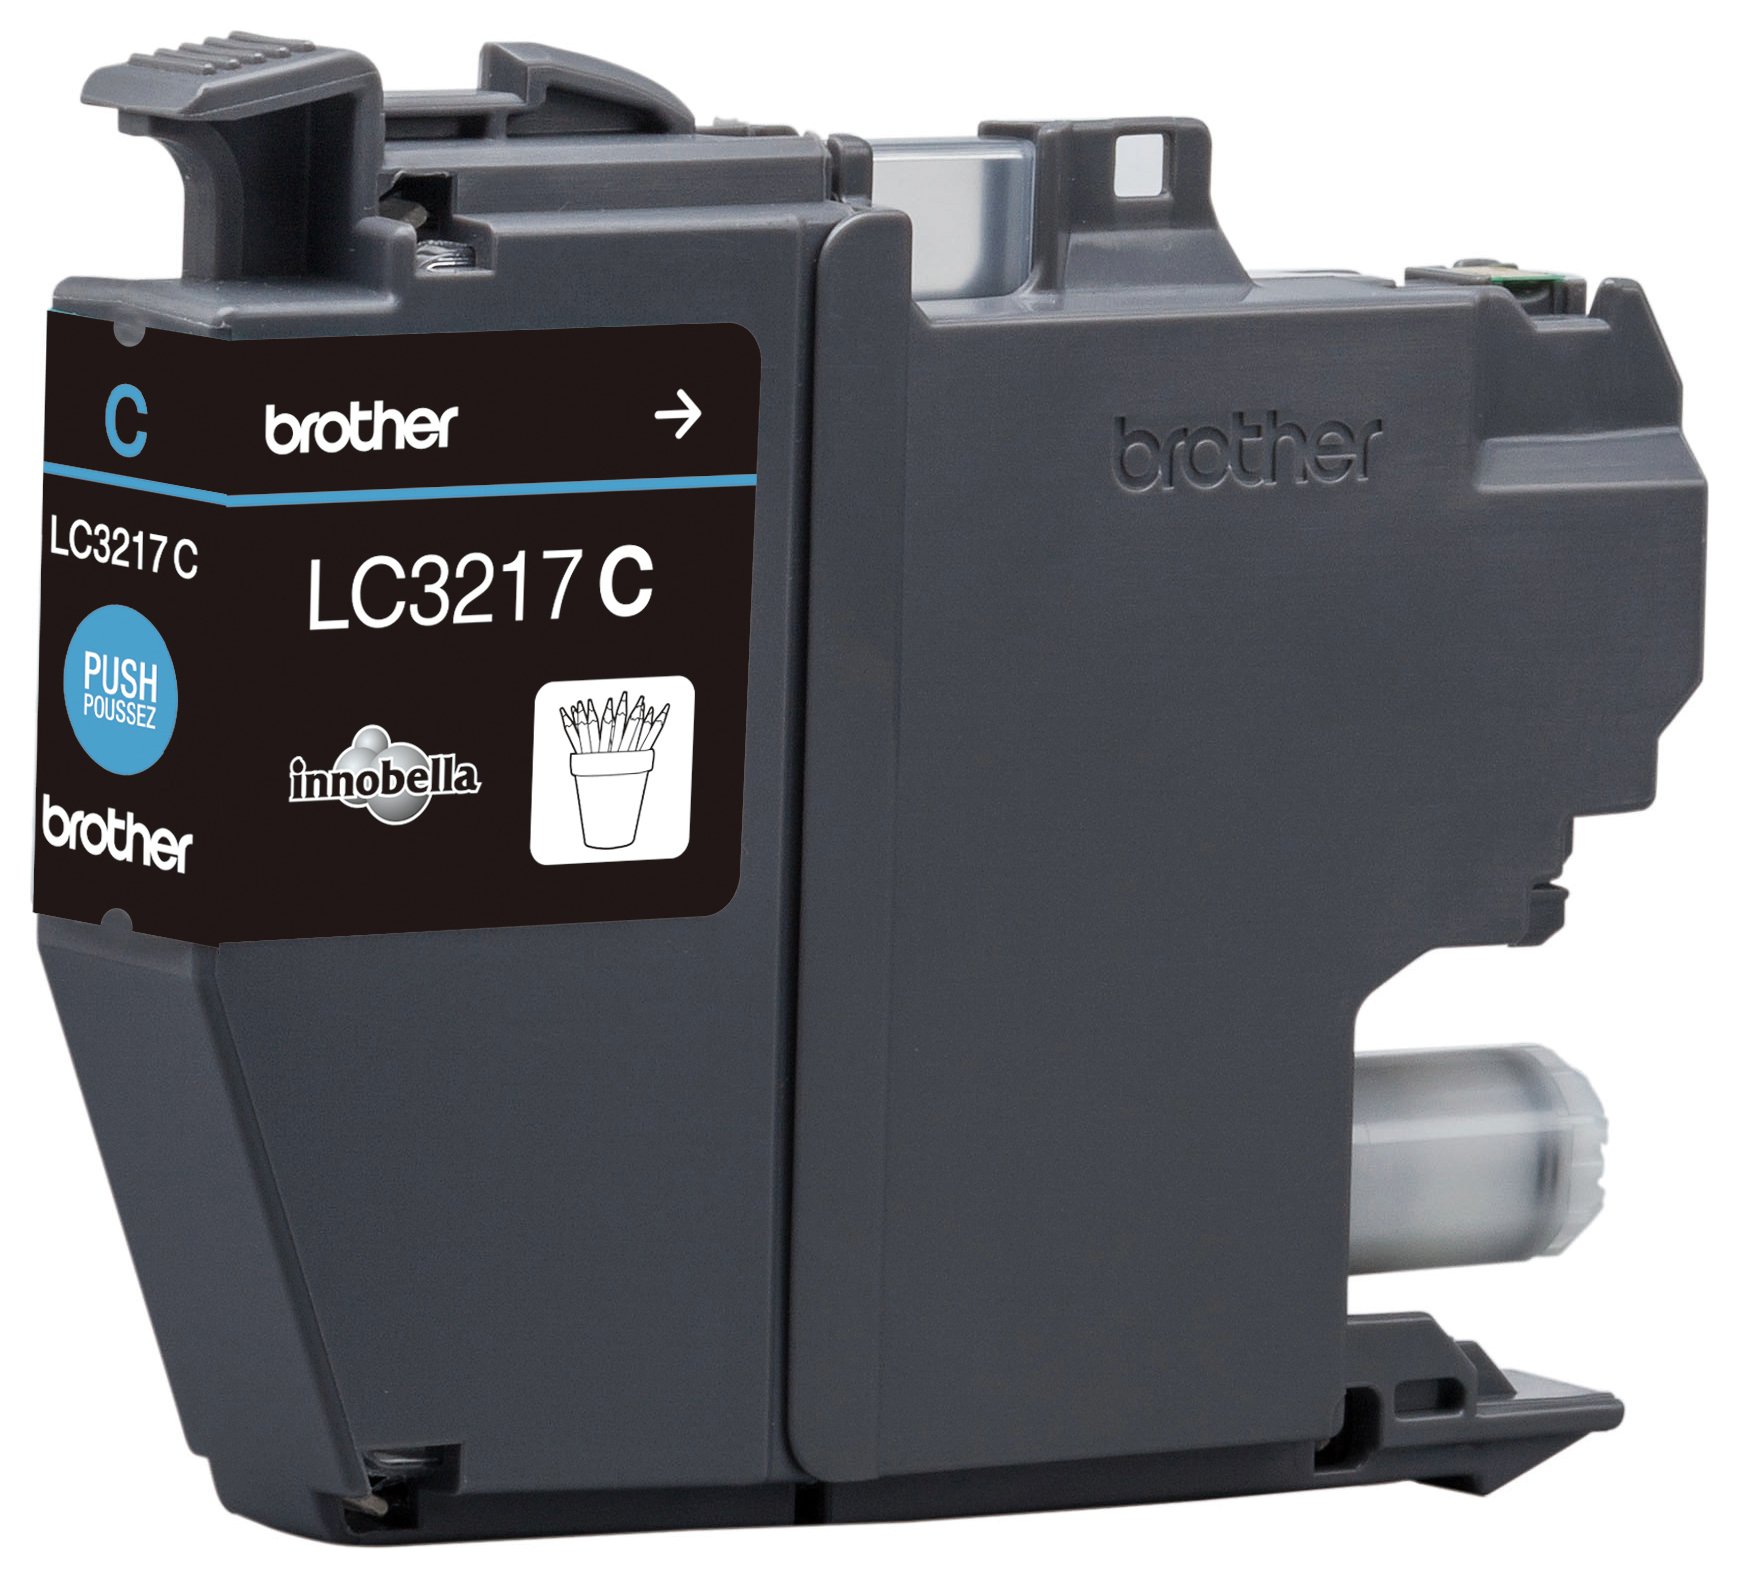 Brother LC3217C Ink Cartridge Review